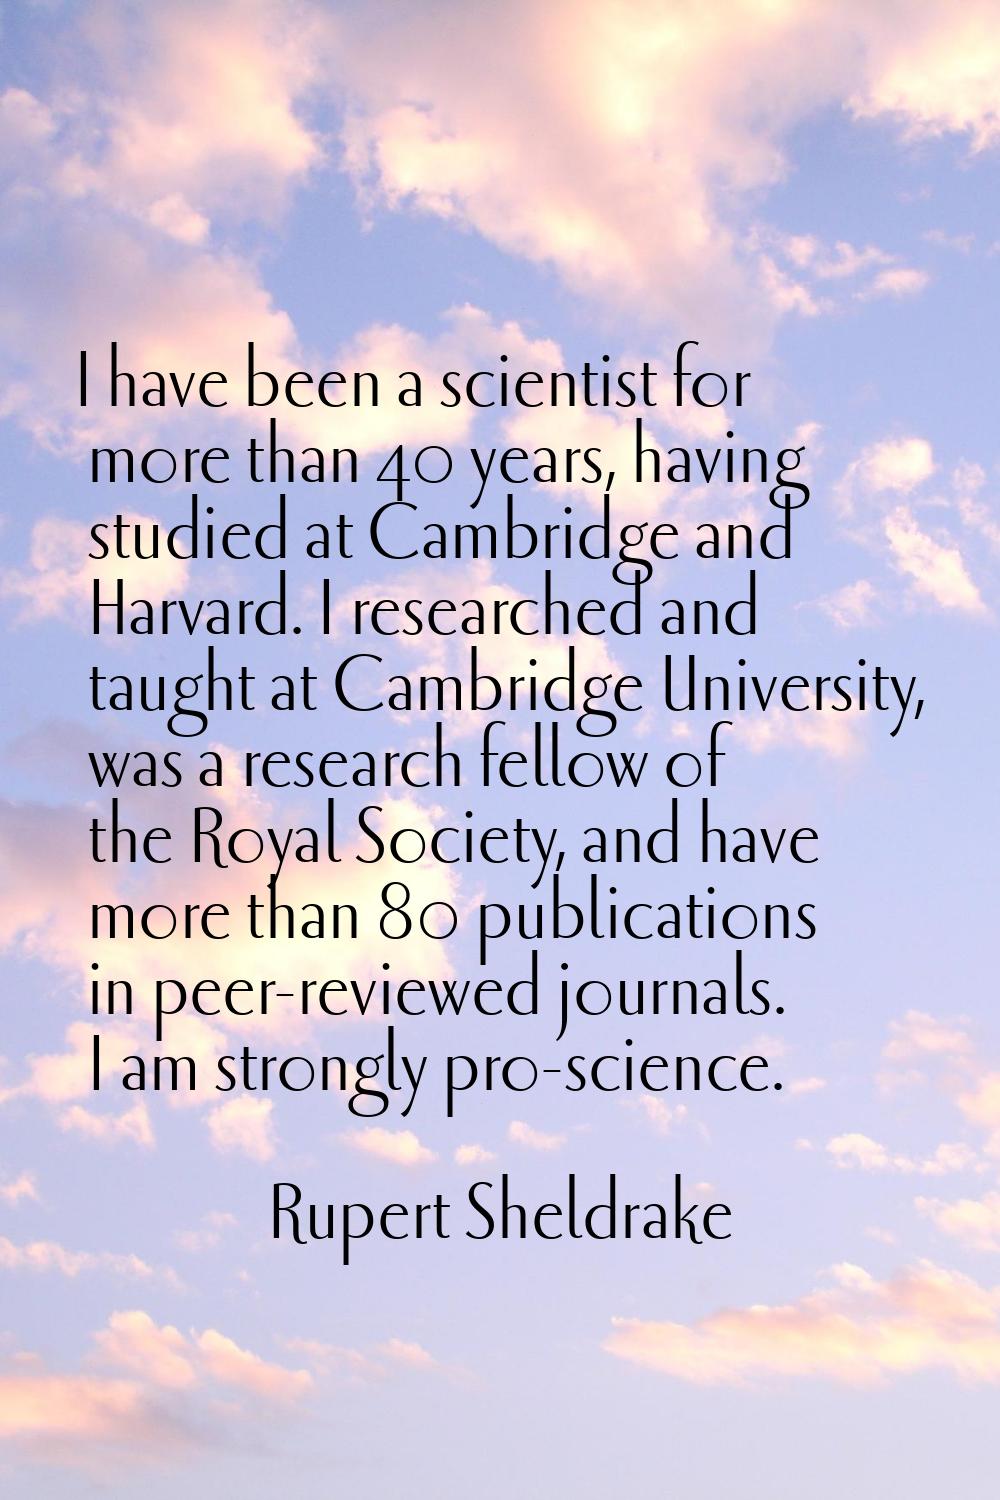 I have been a scientist for more than 40 years, having studied at Cambridge and Harvard. I research